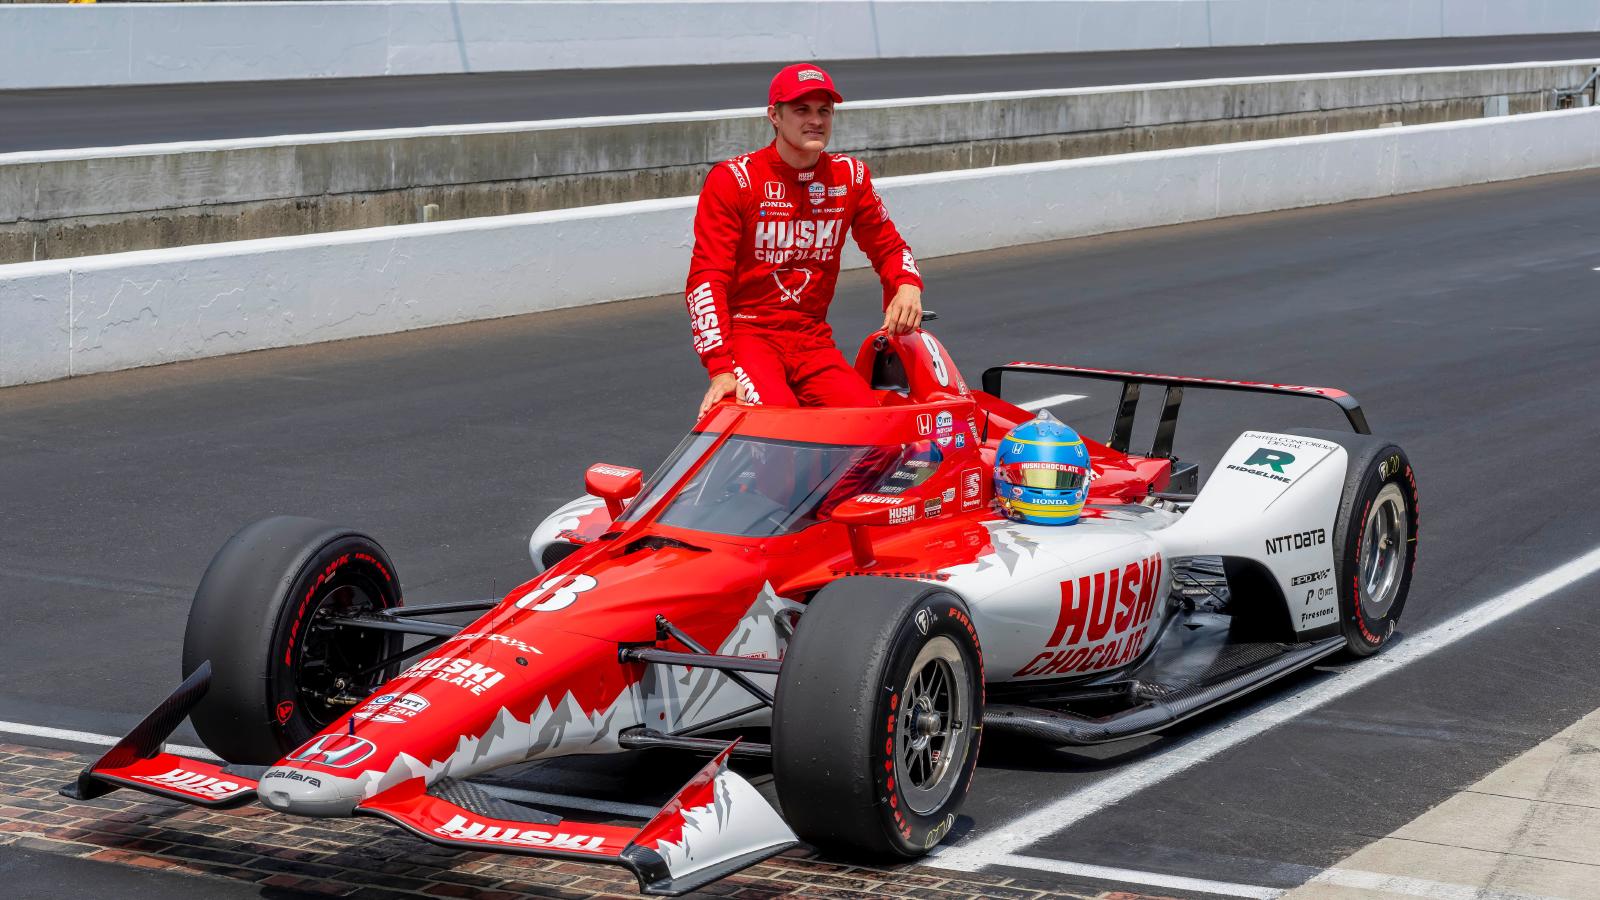 Indy 500 news: Marcus Ericsson claims dramatic win ahead of Pato O'Ward after red flag chaos